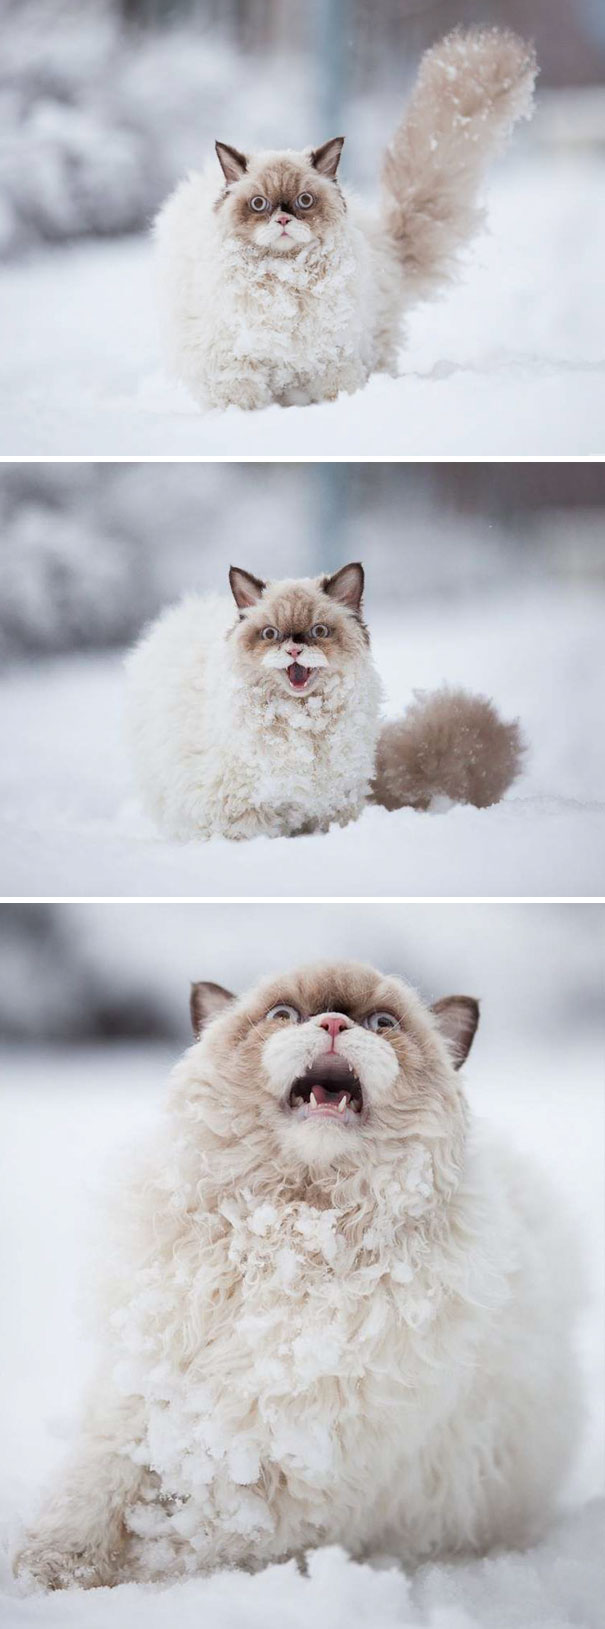 This Cat Discovers Snow For The First Time